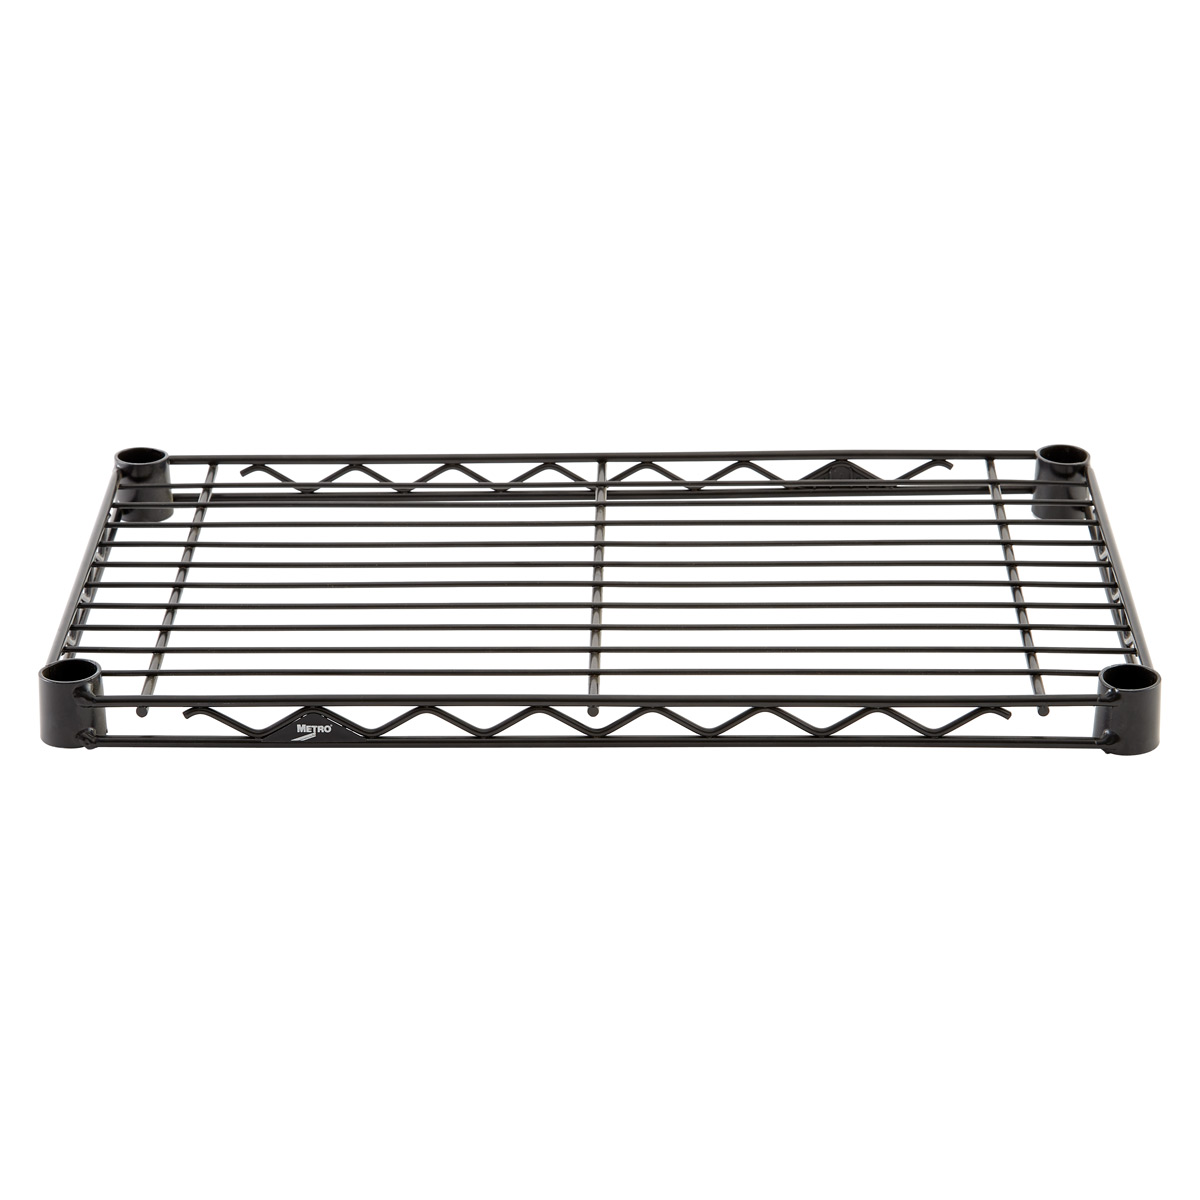 14" InterMetro Wire Shelves | The Container Store